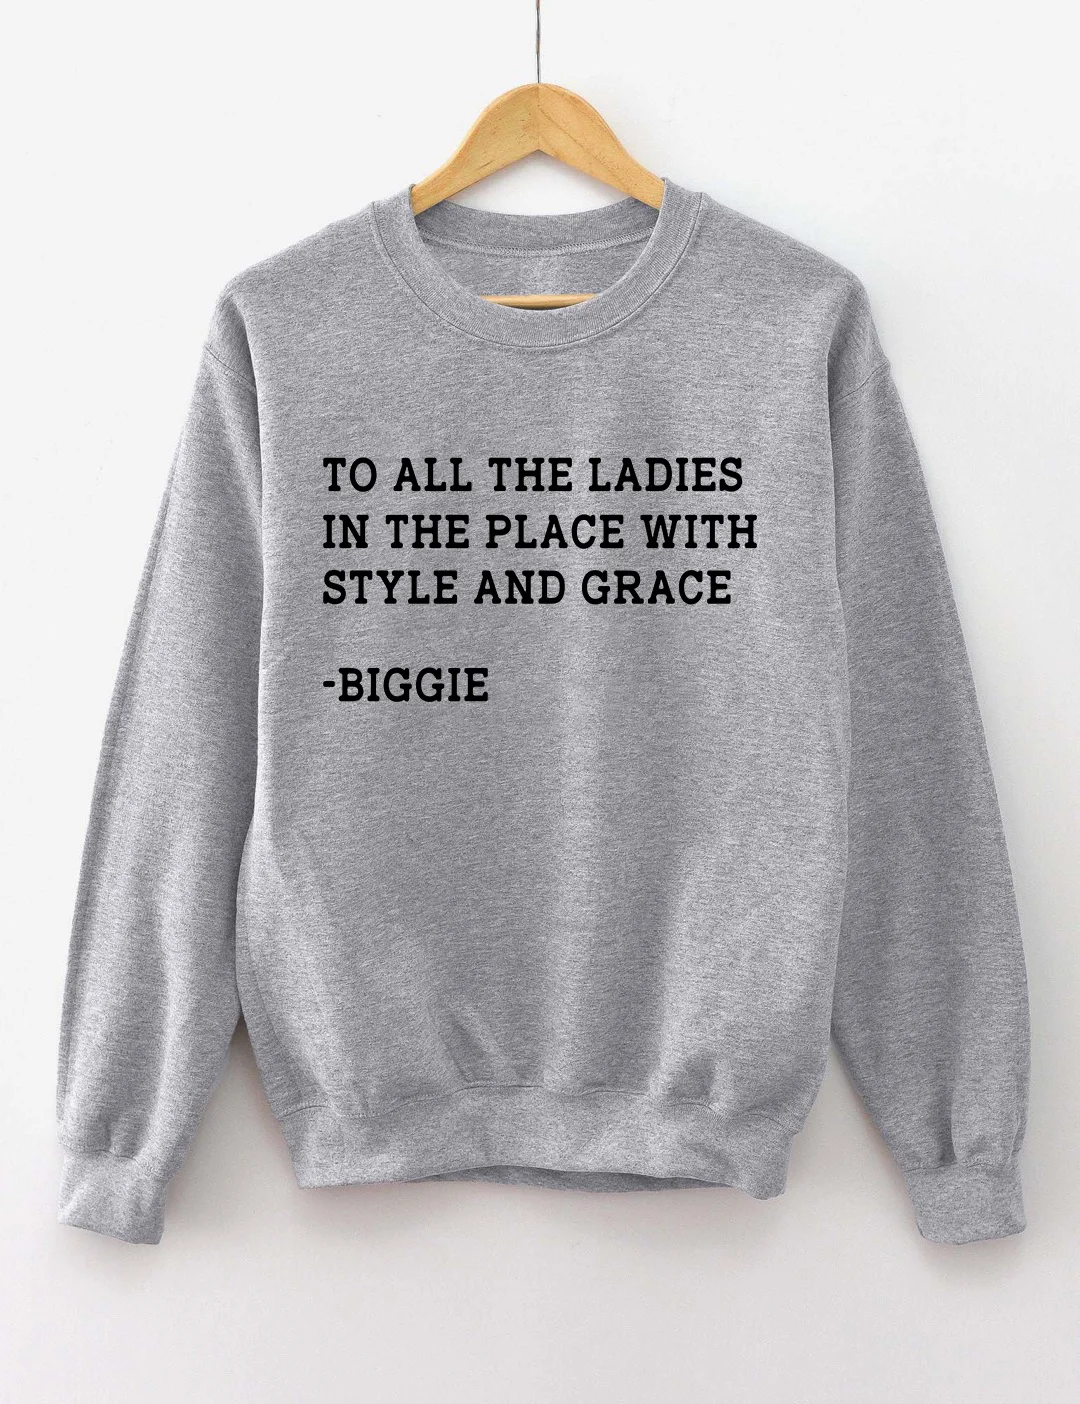 To All The Ladies At The Place With Style And Grace Sweatshirt